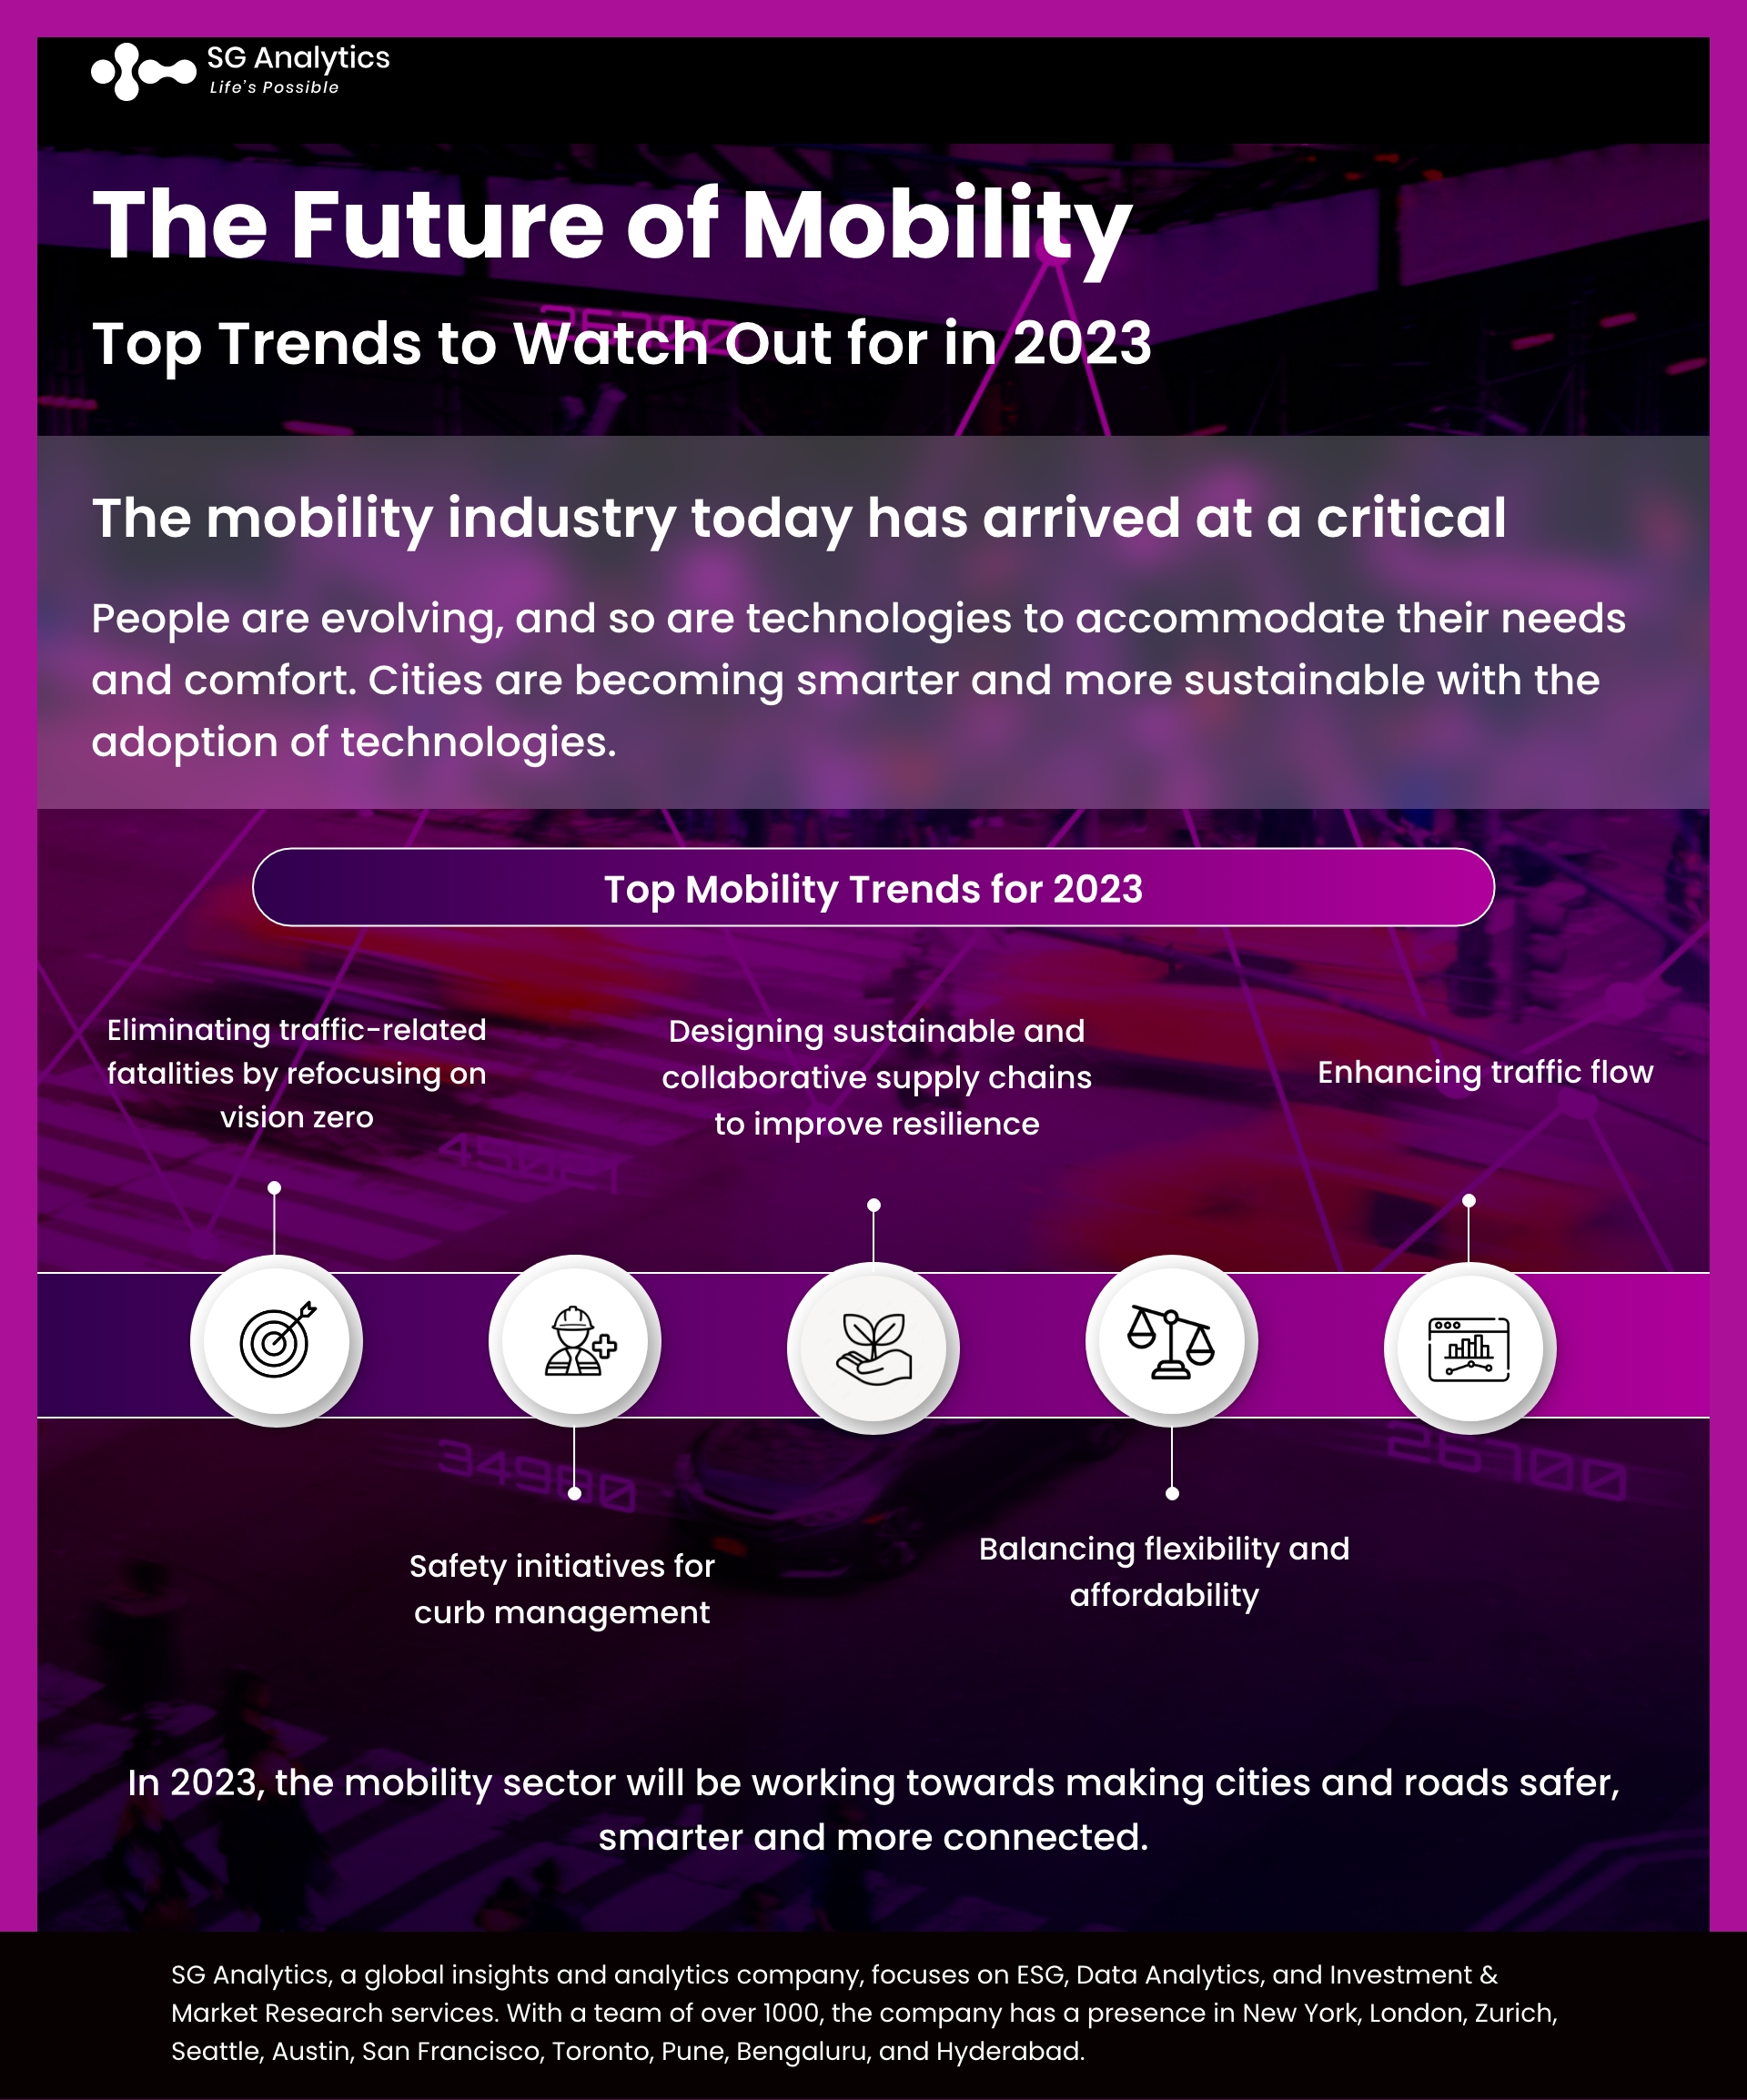 The Future of Mobility: Top Trends to Watch Out for in 2023 